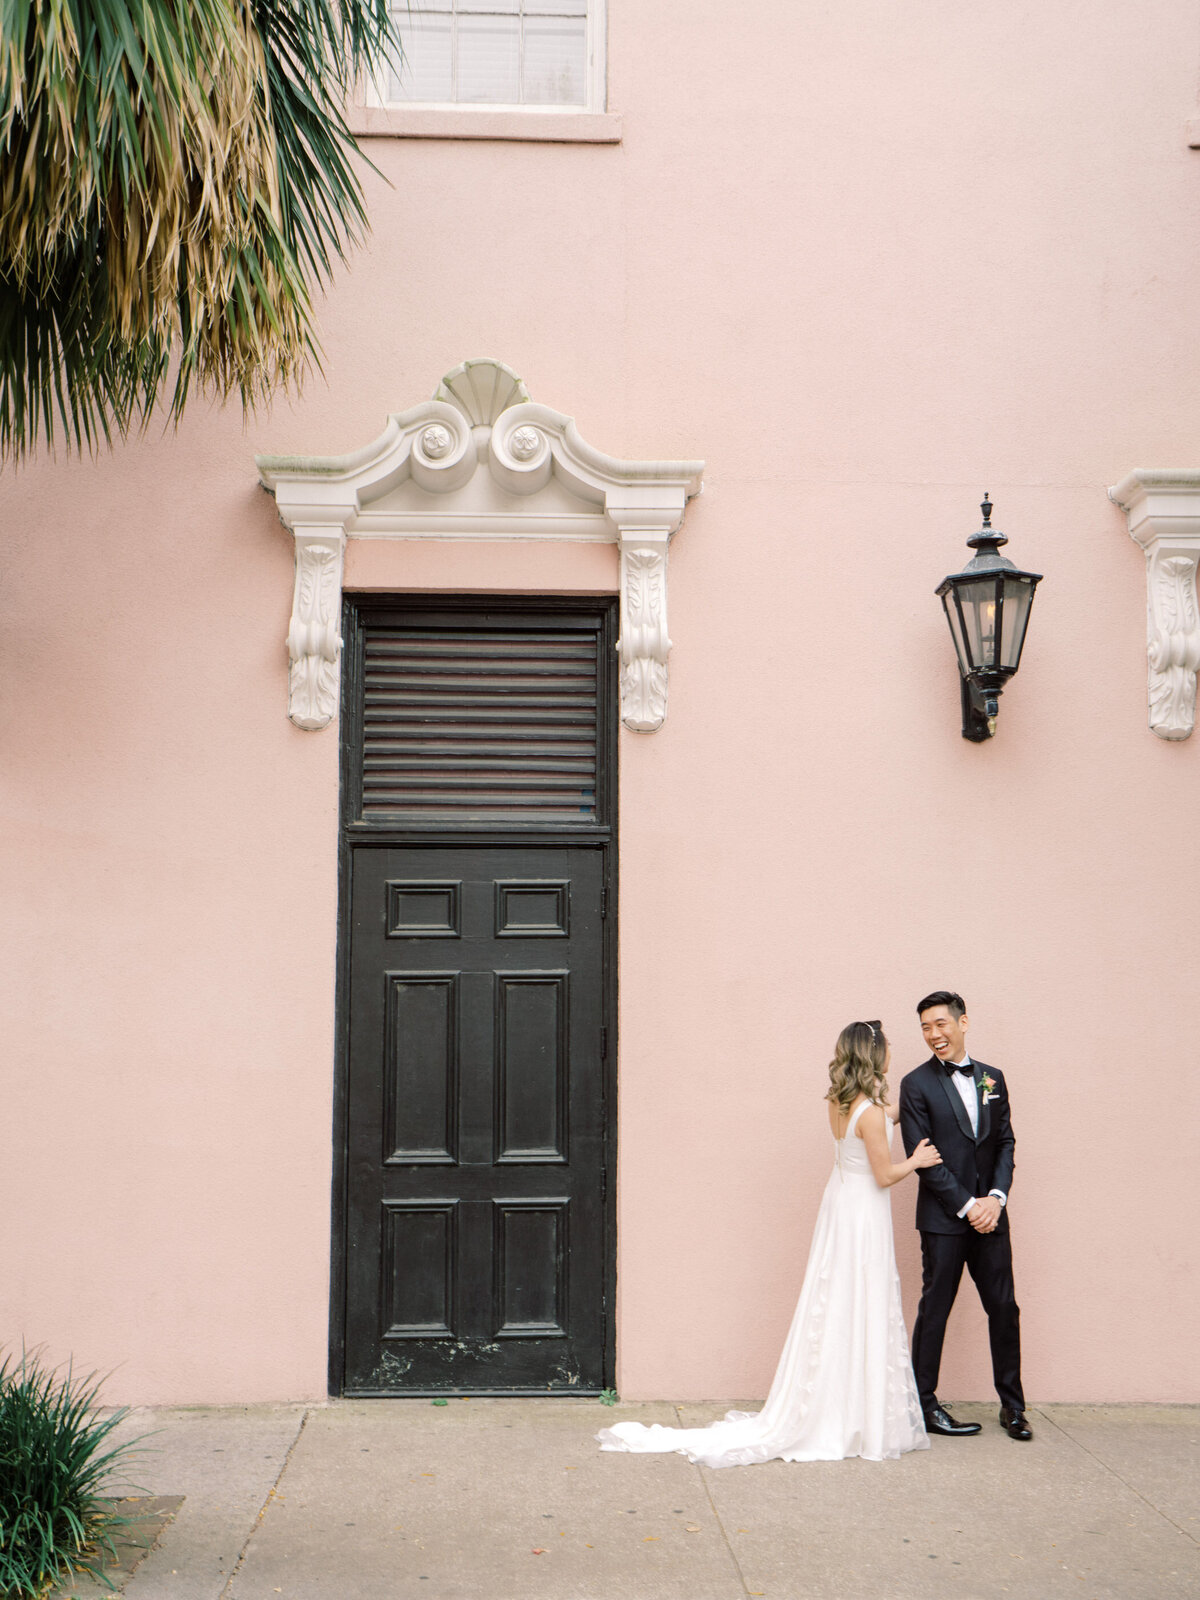 Cannon-Green-Wedding-in-charleston-photo-by-philip-casey-photography-030